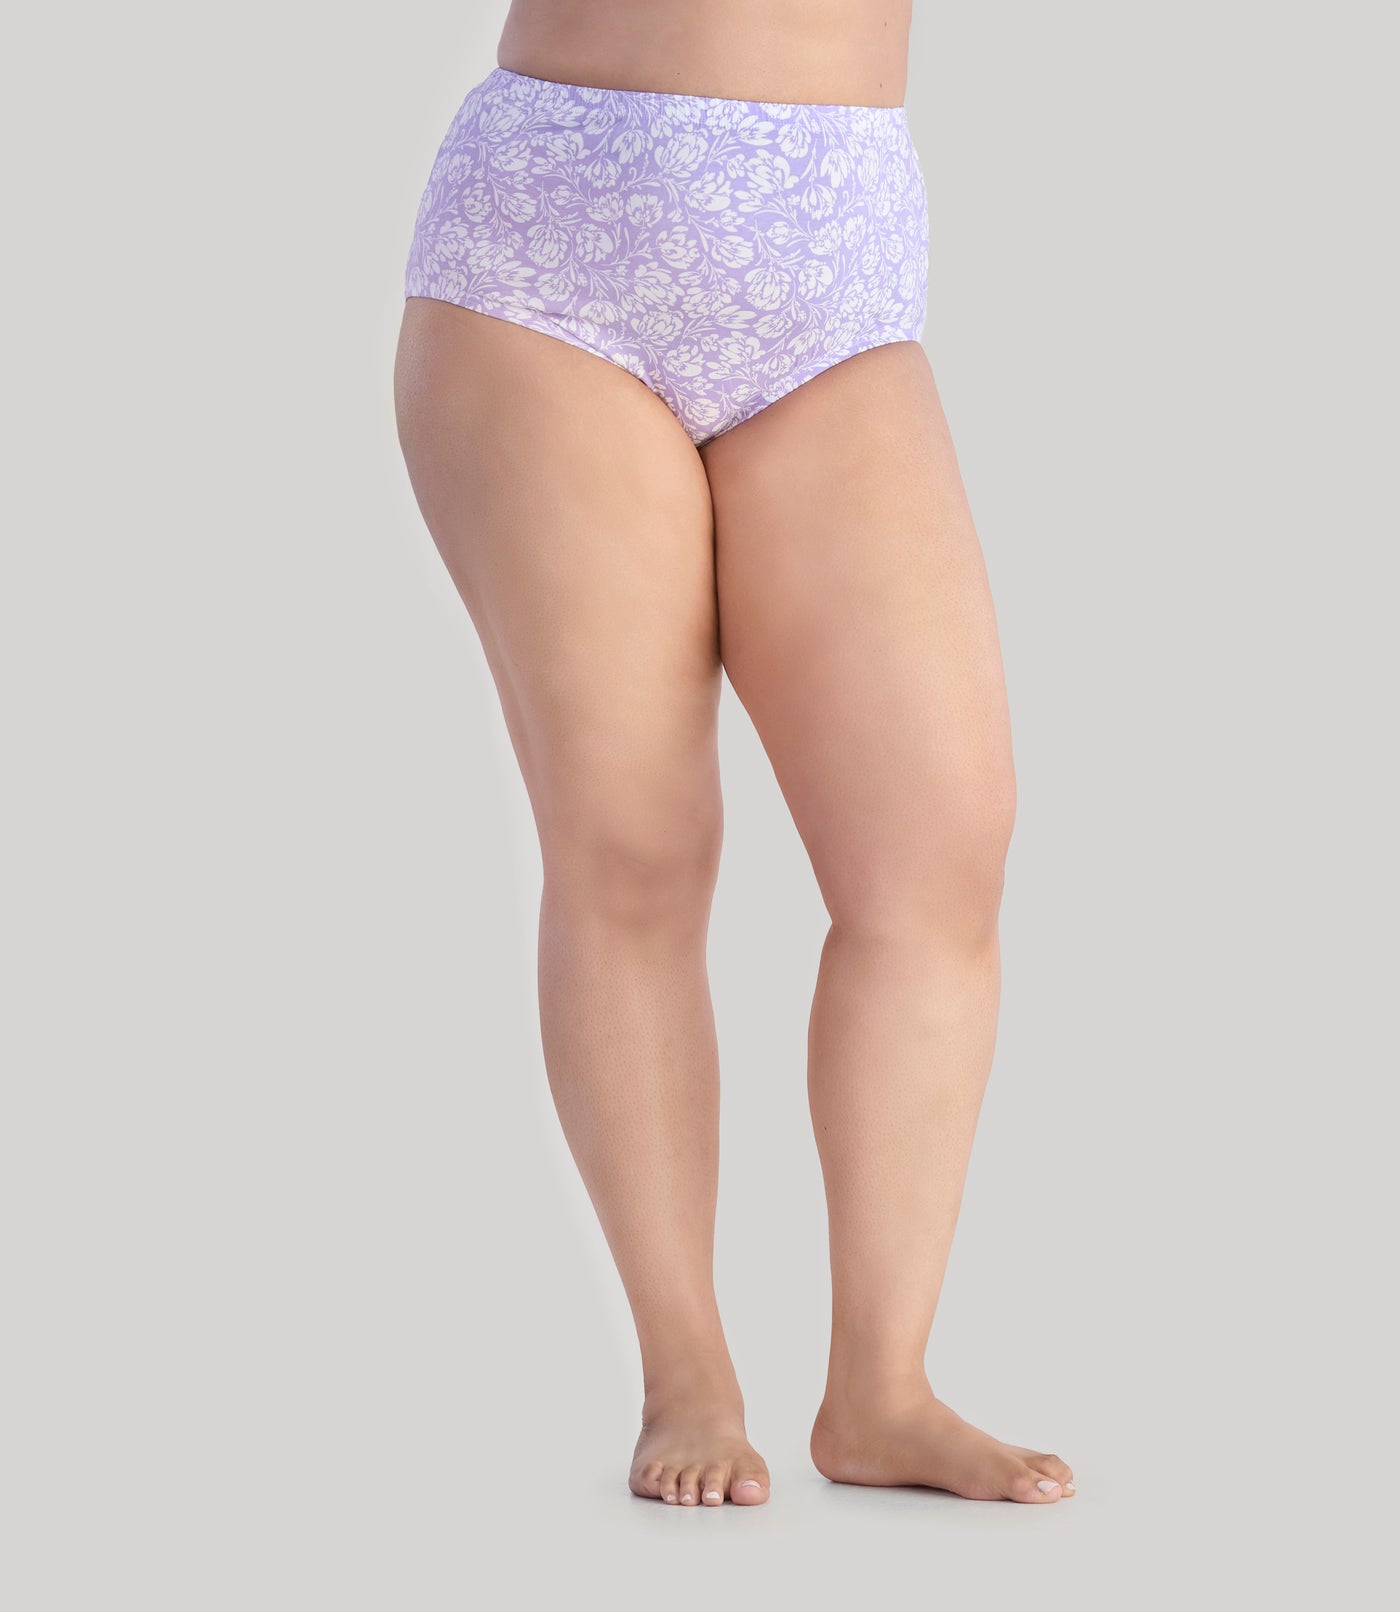 Model, facing front, wearing Junowear Cotton Stretch Classic Full Fit Brief Flower Prints in color purple and white flower. 